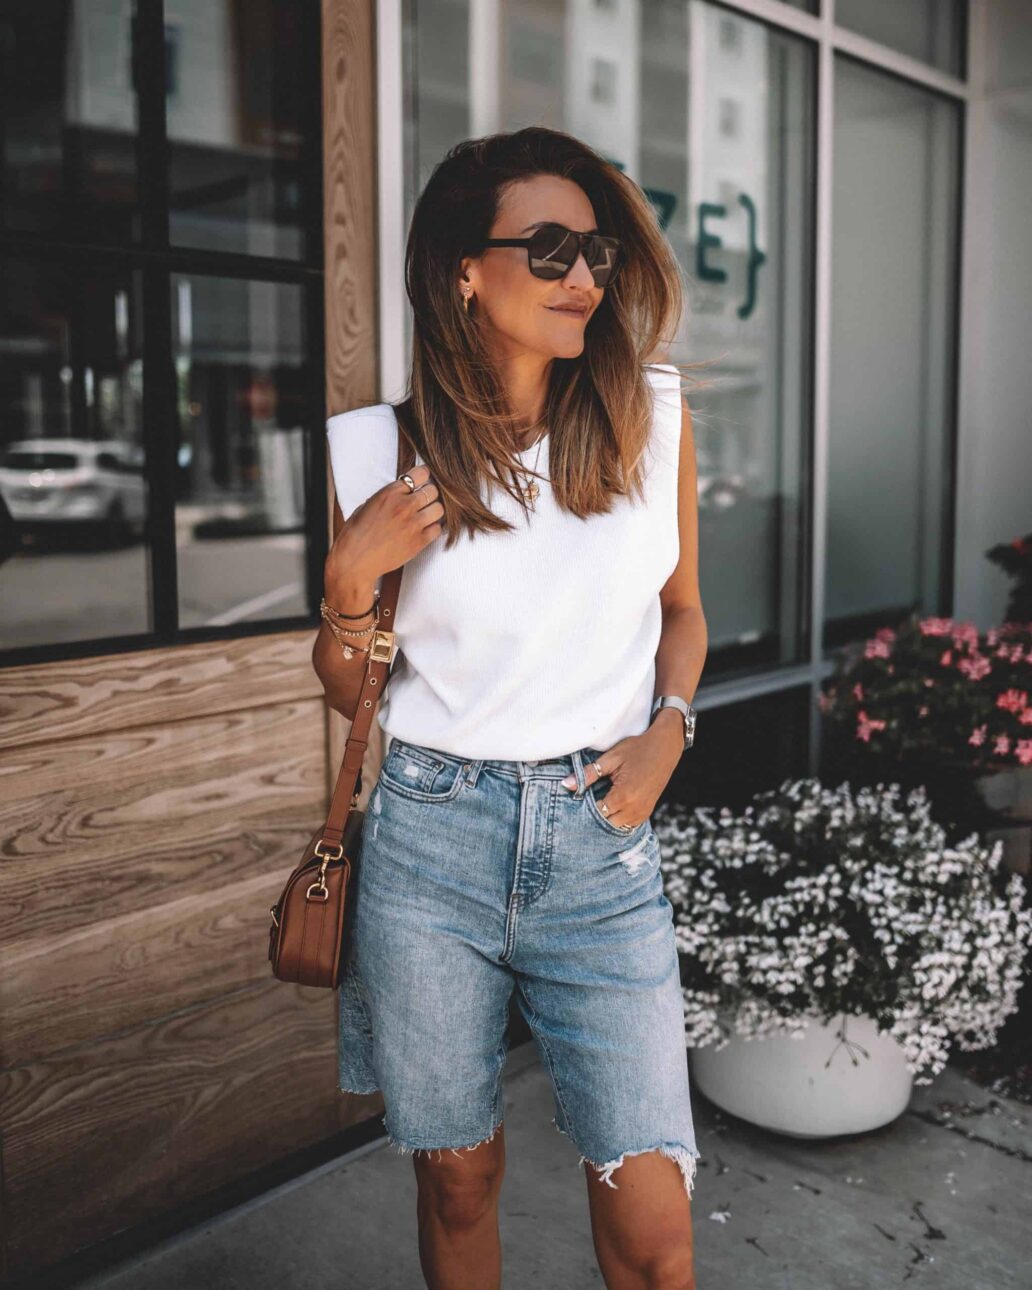 Exactly Right High Waisted Mid-Length Shorts - Light Denim